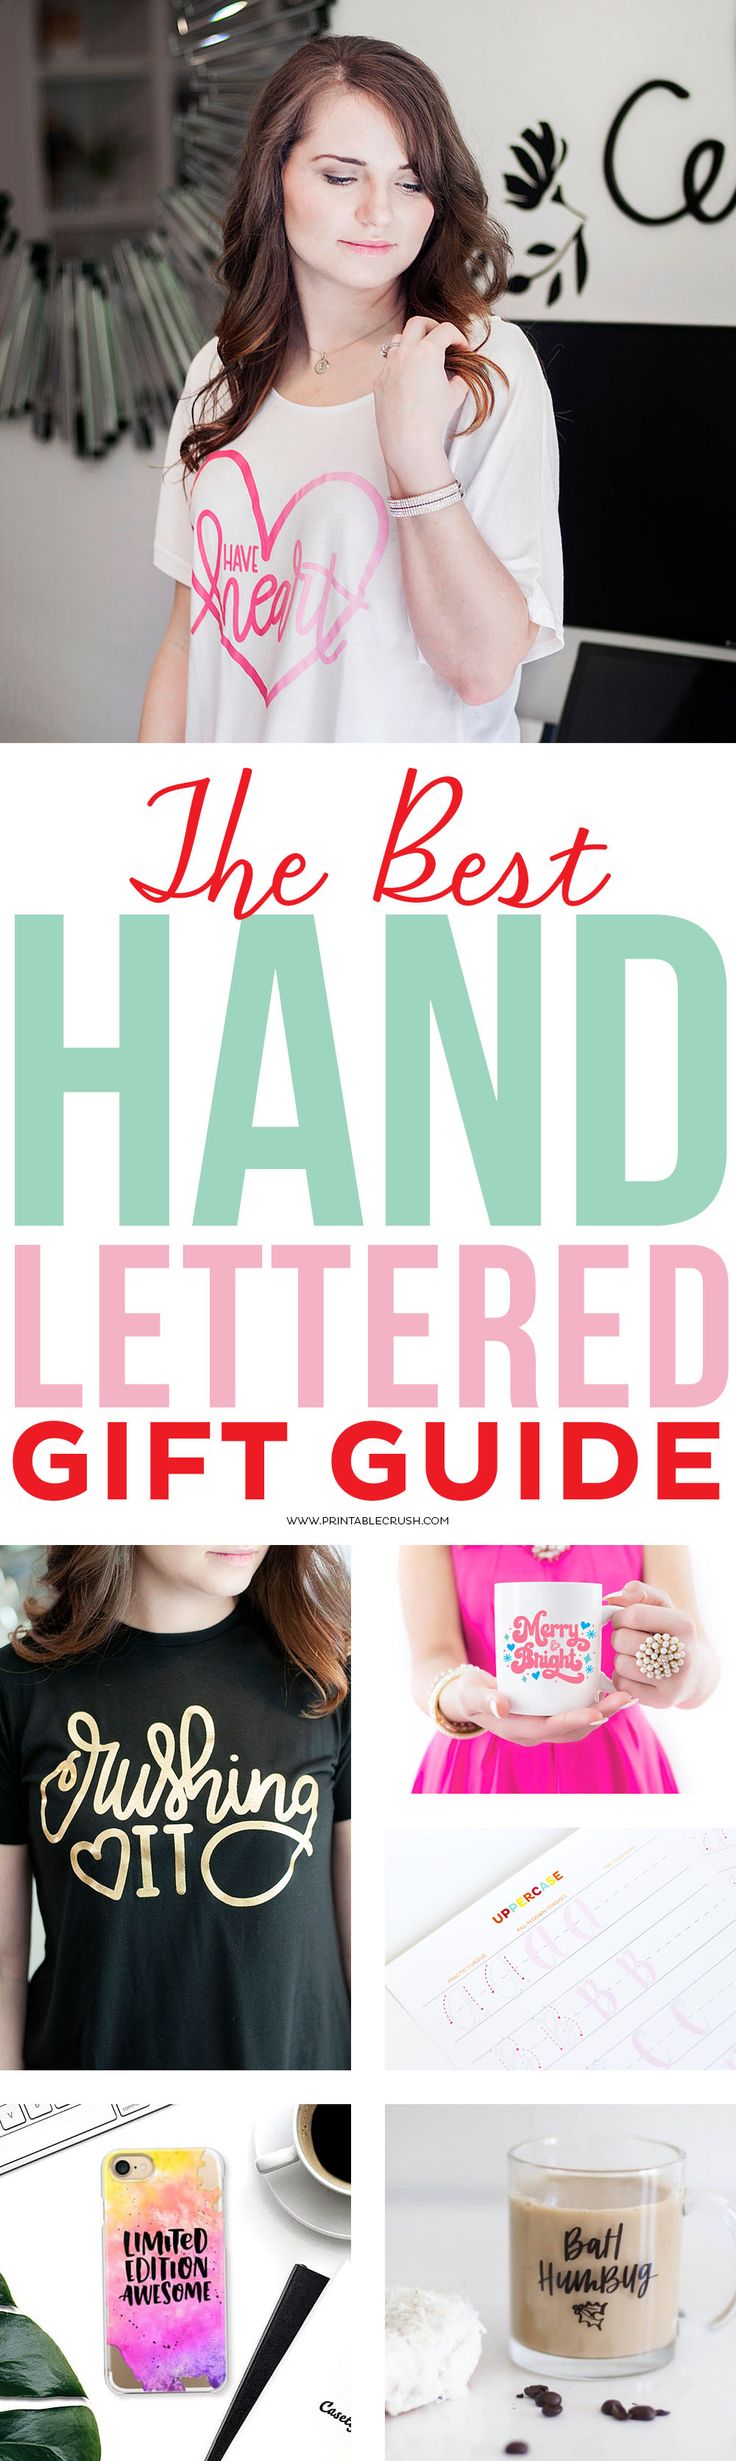 This Hand Lettered Gift Guide is perfect for anyone who loves LETTERING! From c...